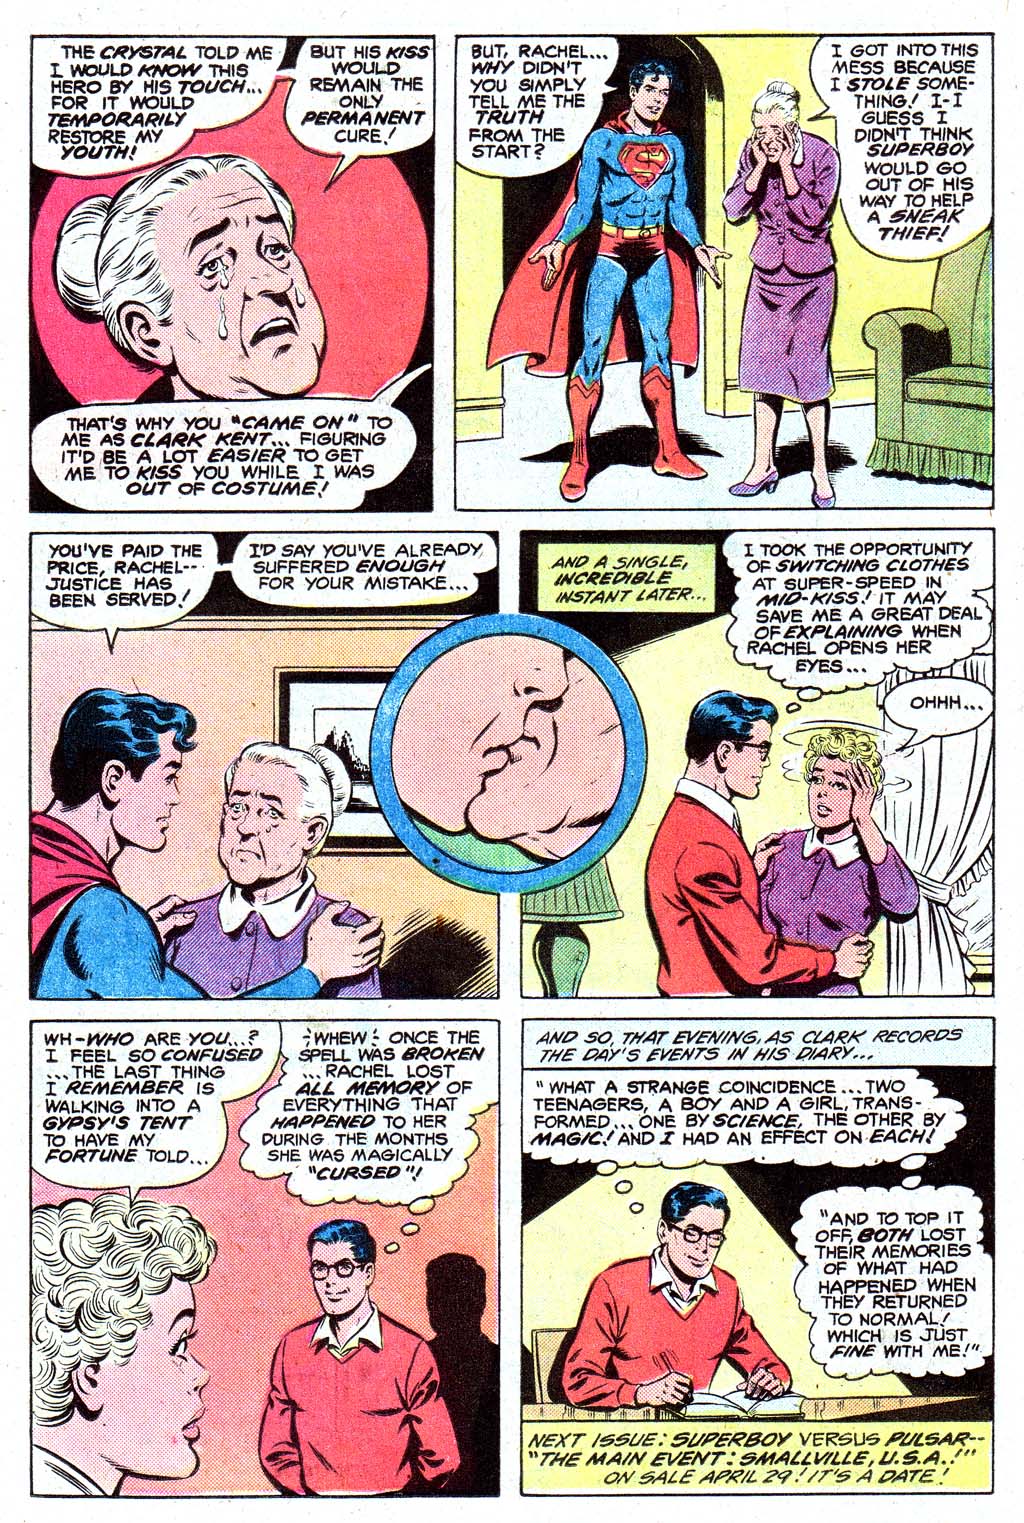 The New Adventures of Superboy 30 Page 21